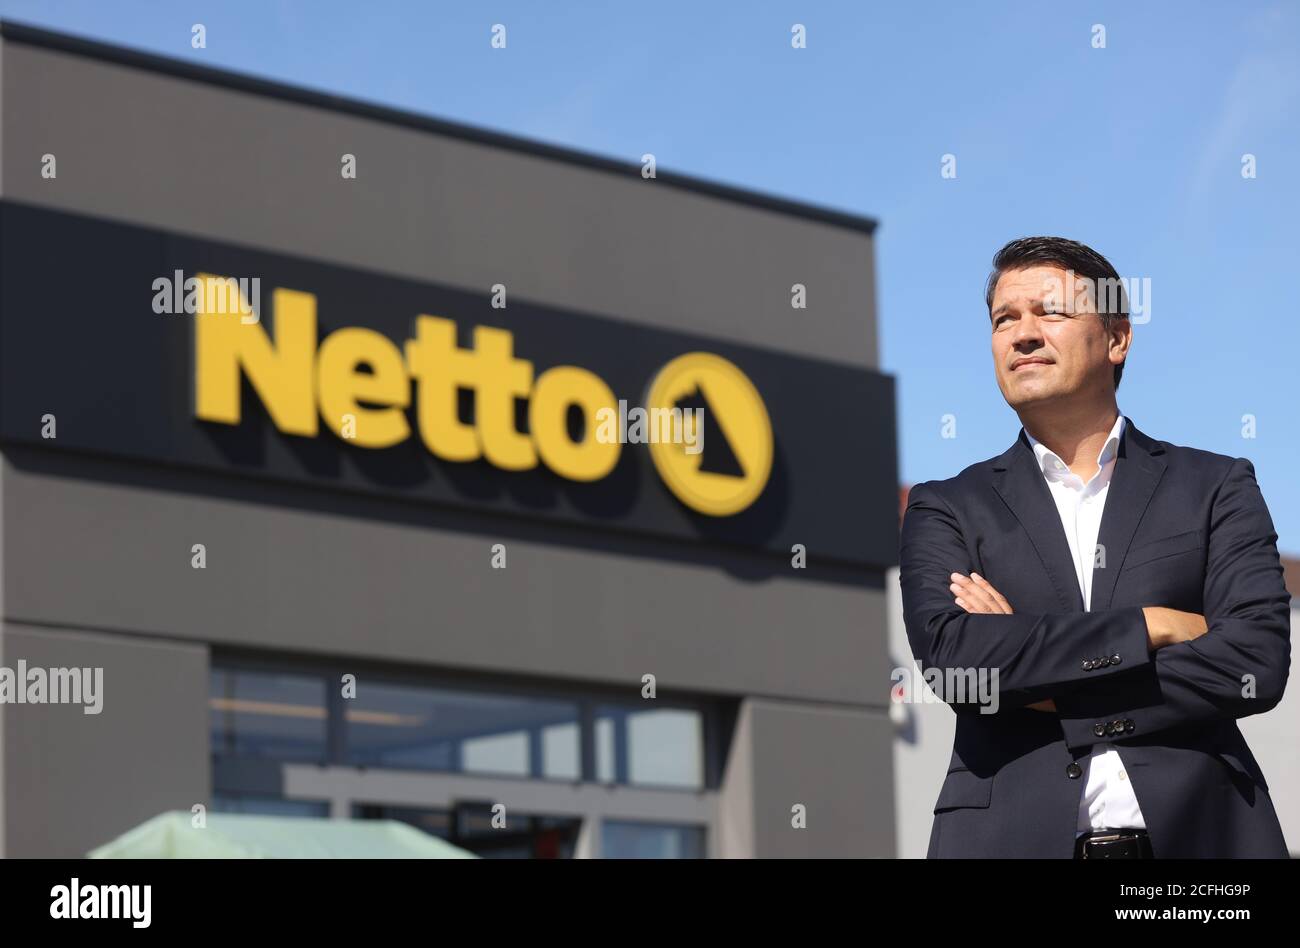 03 September 2020, Mecklenburg-Western Pomerania, Malchin: Managing Director Ingo Panknin of the retail chain Netto ApS & Co. KG is standing in front of a Netto branch. The first branch opened 30 years ago in Vorpommern. In the meantime, the company is one of the largest in the northeast of Germany with about 6000 employees. So far, the discounter has been represented 112 times in Mecklenburg-Western Pomerania alone, 143 times in Berlin and Brandenburg as well as in Saxony, Saxony-Anhalt, Lower Saxony, Hamburg and Schleswig-Holstein. (to dpa 'Only MV retail chain wants to grow - Corona crisis Stock Photo